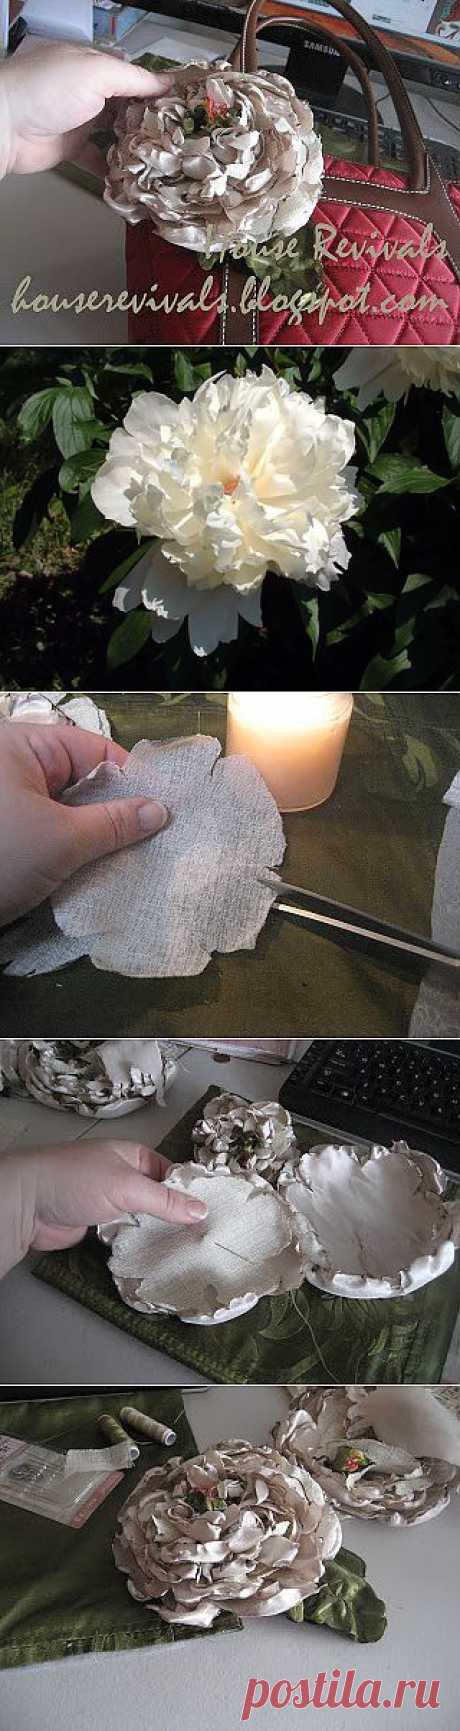 House Revivals: How to Make a Burnt Peony